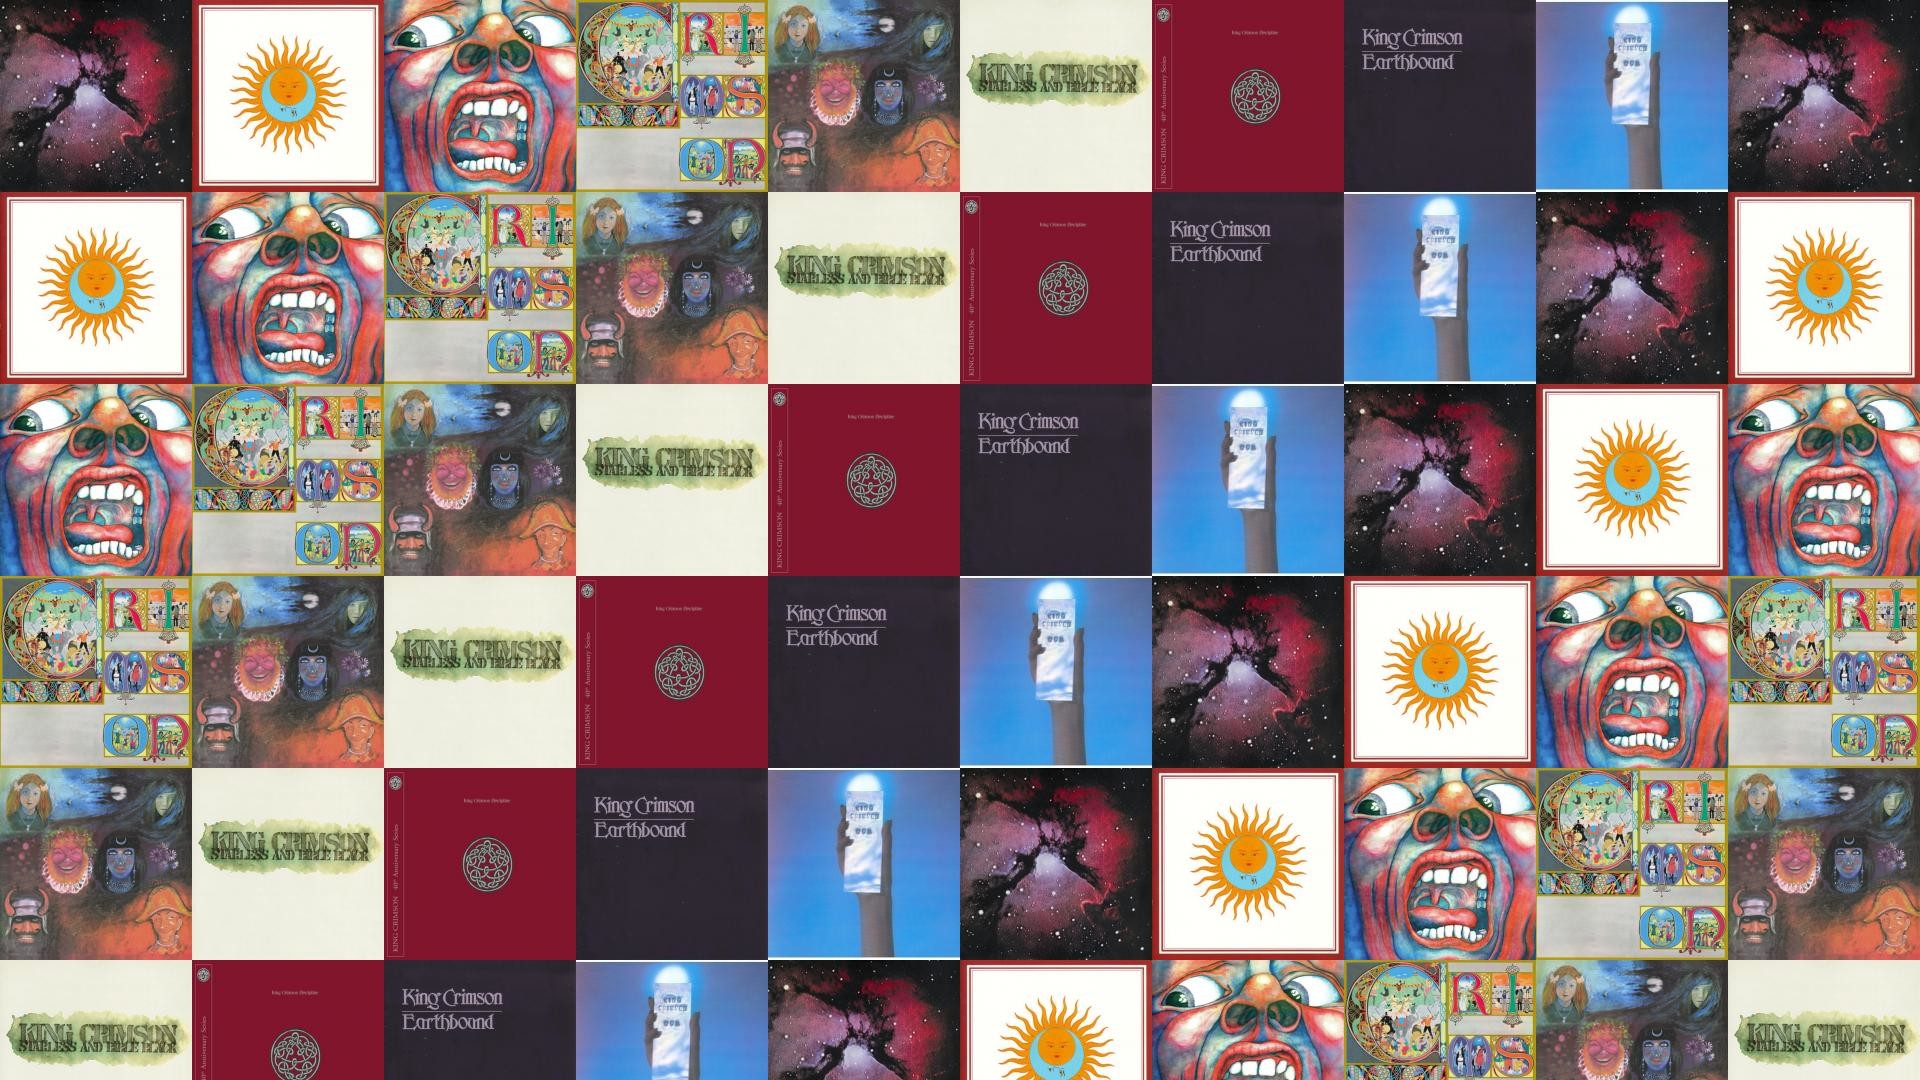 1920x1080 Wallpapers King Crimson Islands Larks Tongues In Aspic  .